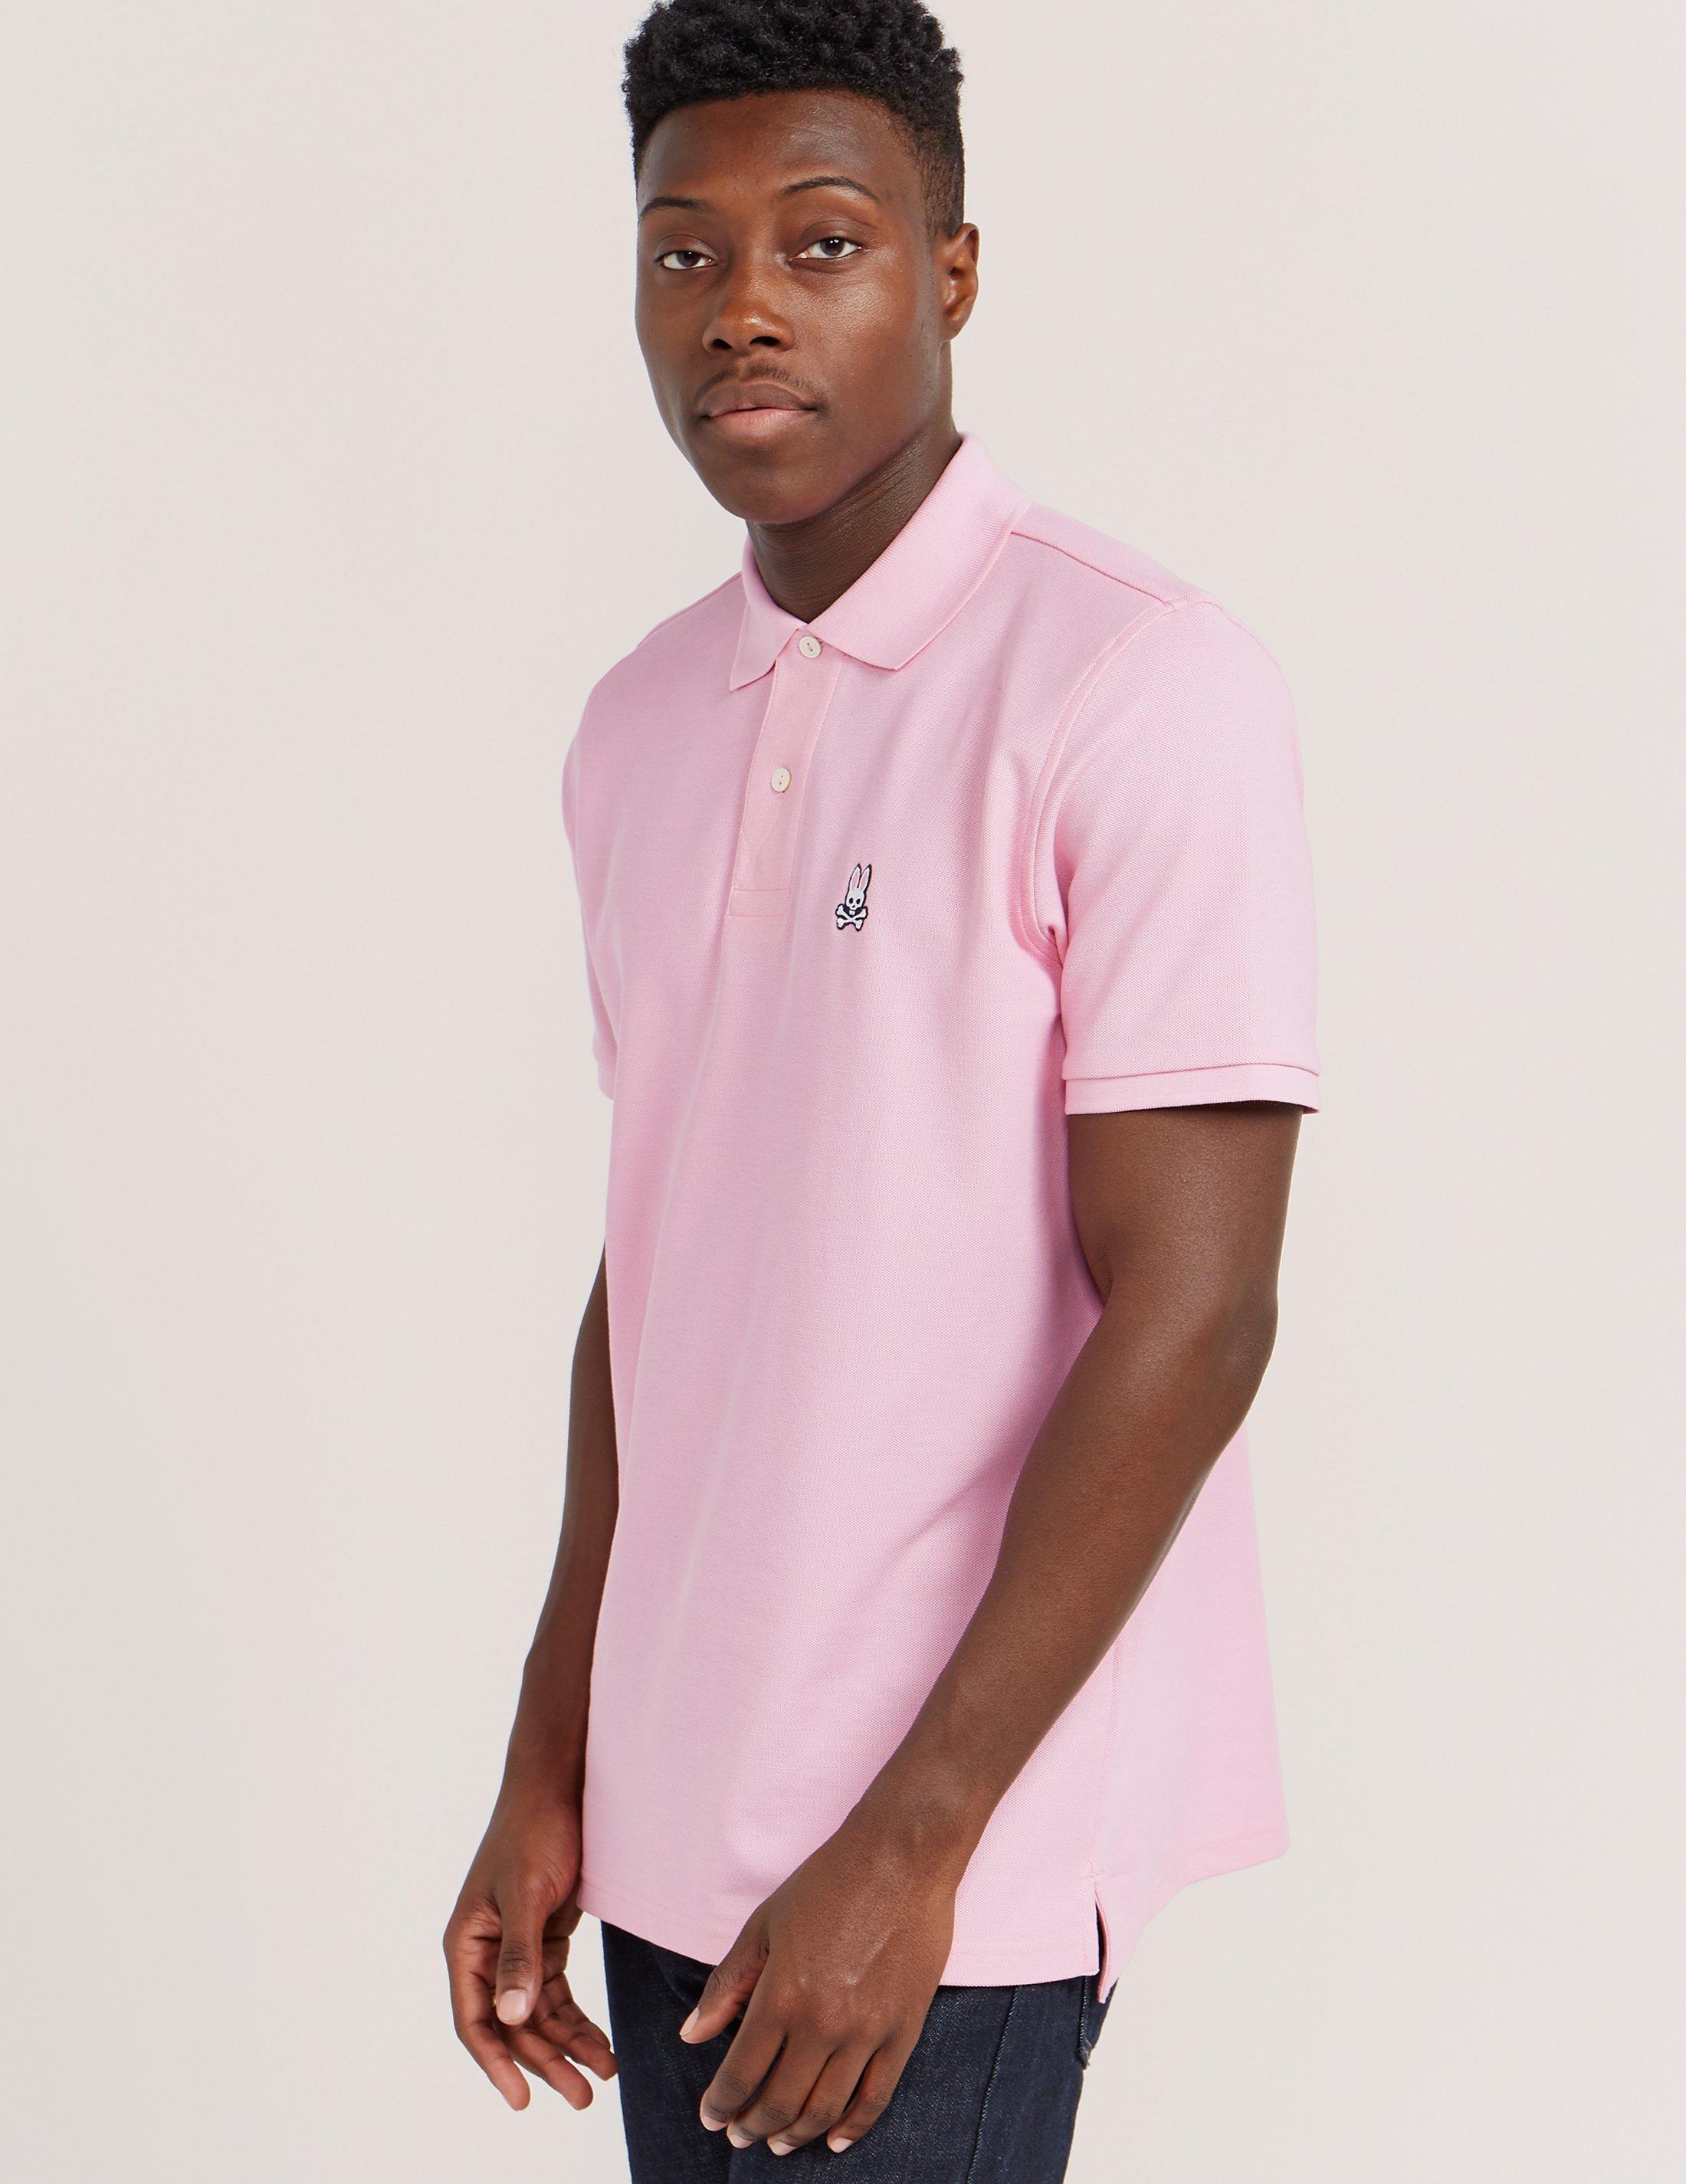 Lyst - Psycho Bunny Basic Short Sleeve Polo Shirt in Pink for Men